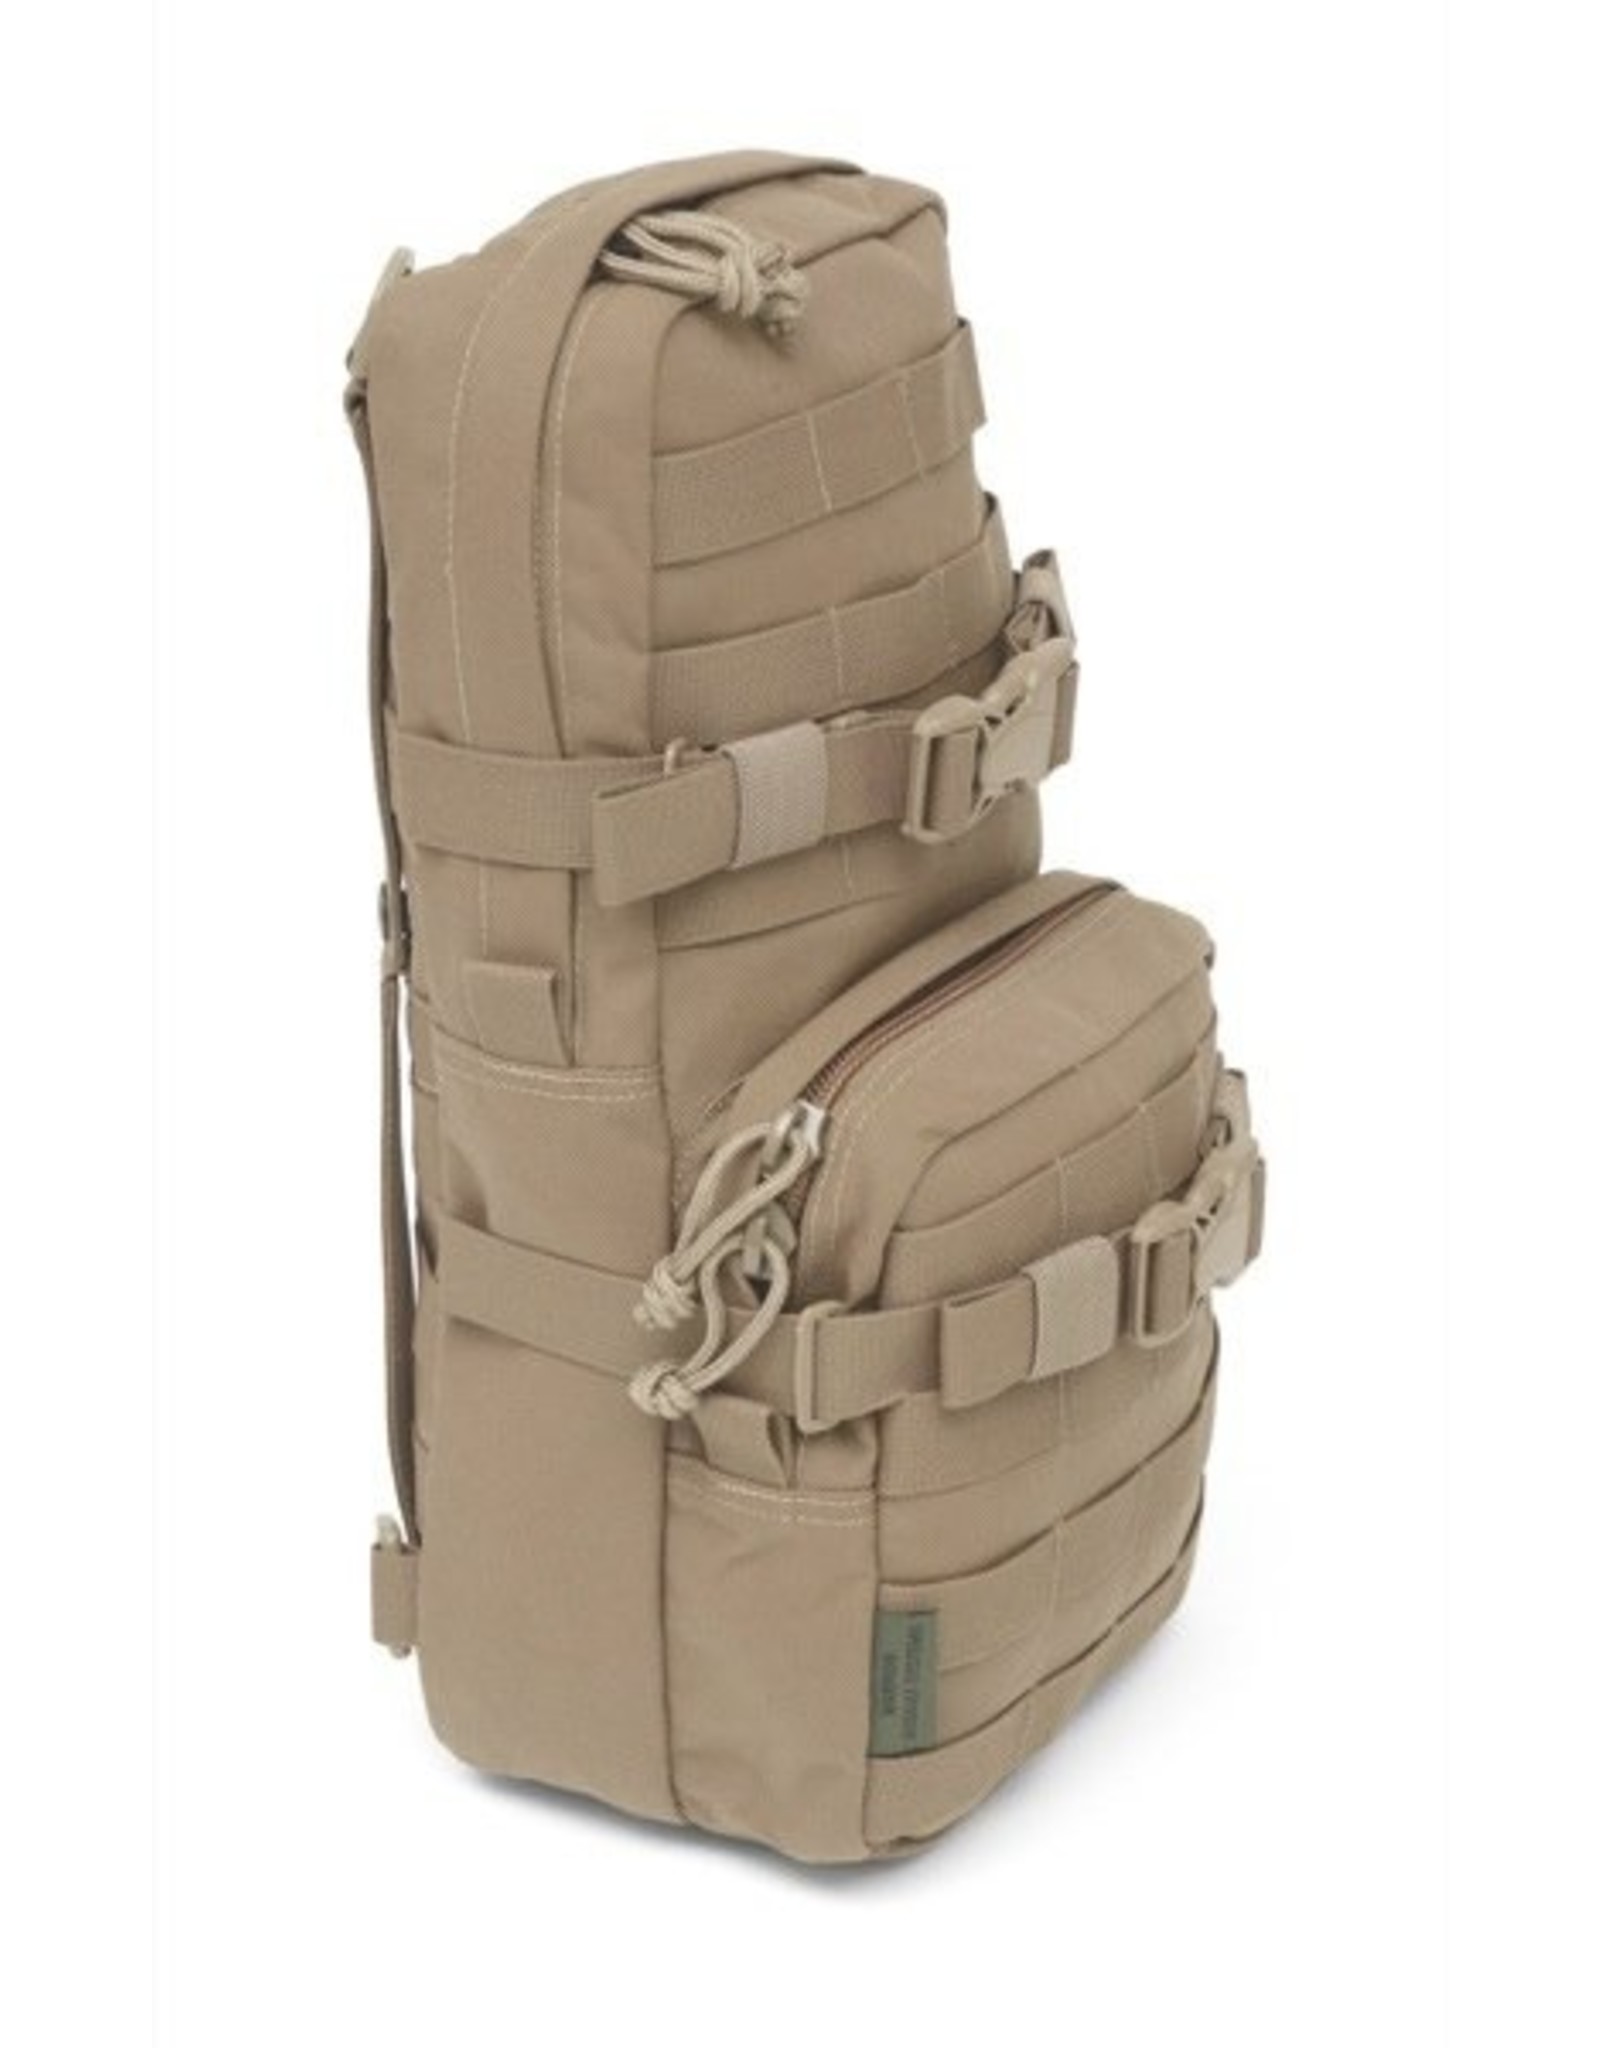 Warrior Cargo Pack with Hydration Compartment - Coyote Tan